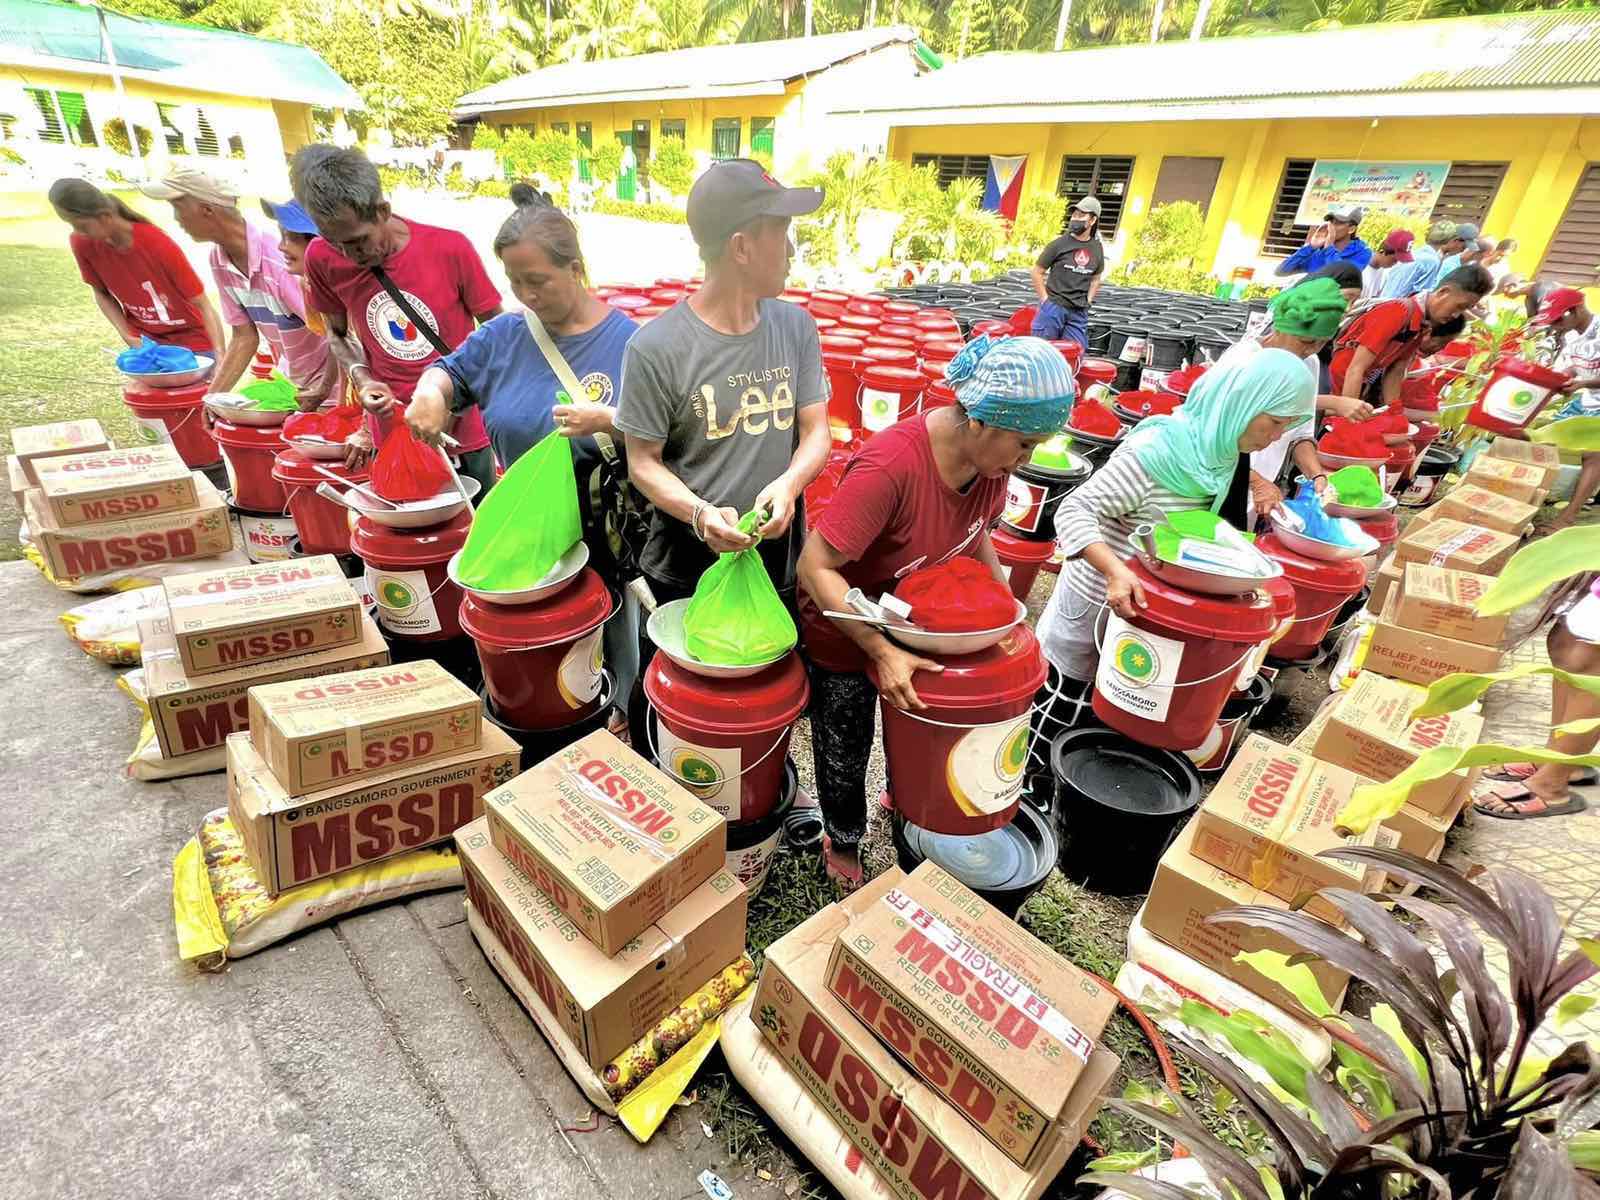 Relief aid distribution continues in DBS, Maguindanao Del Norte